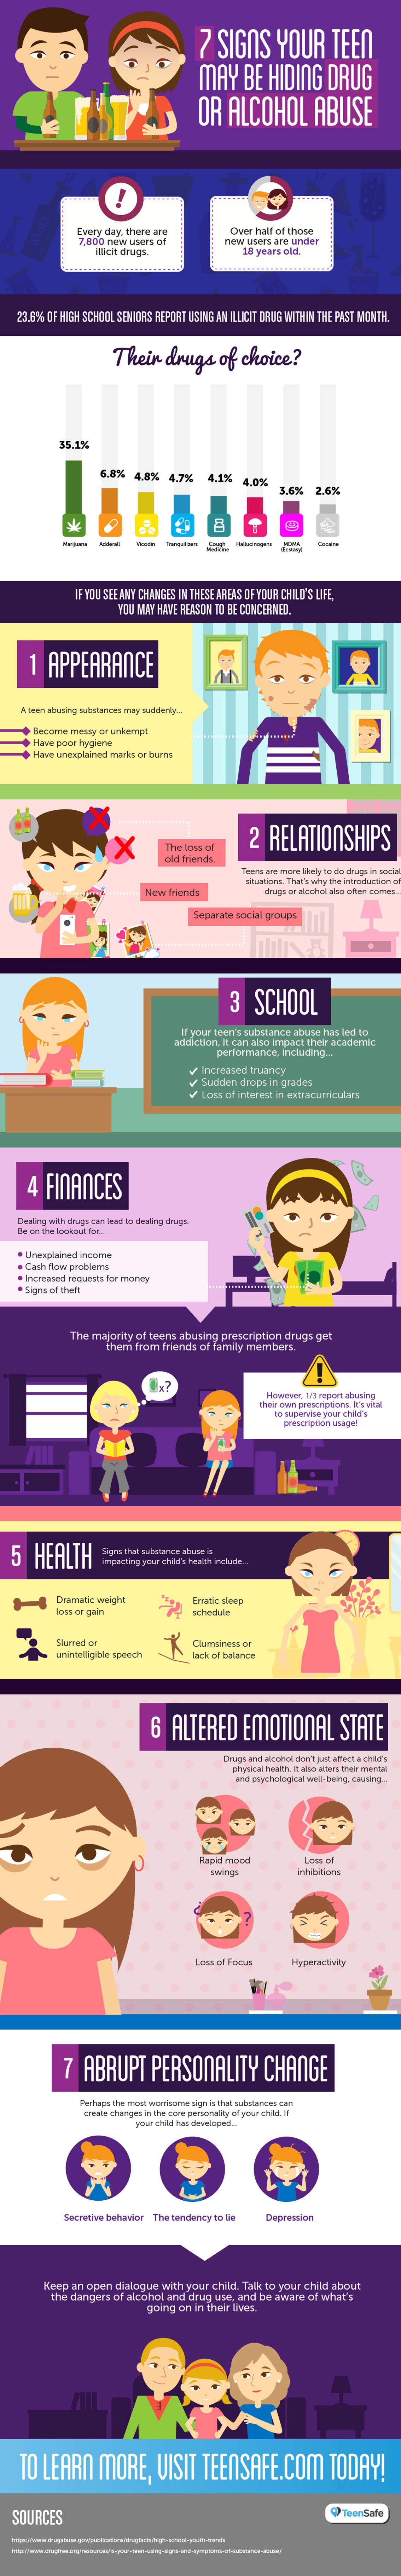 Signs your Teen is Hiding Alcohol and Drug Abuse - Parenting Infographic